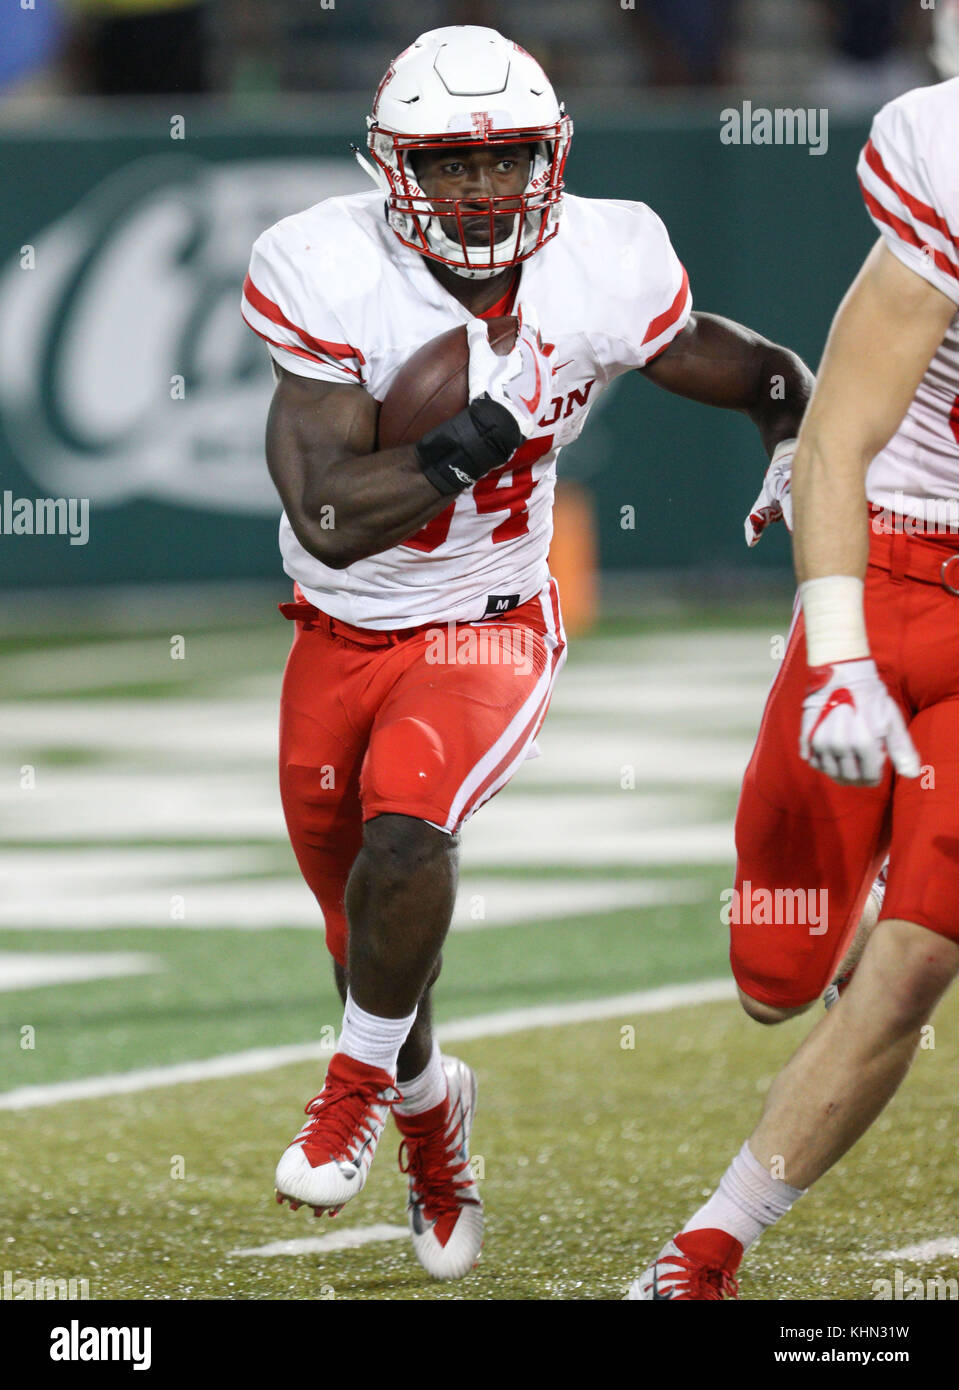 New Orleans, LA, USA. 18th Nov, 2017. Houston's Mulbah Car #34 carries the ball during the NCAA football game between the Tulane Green Wave and the Houston Cougars at Yulman Stadium in New Orleans, LA. Kyle Okita/CSM/Alamy Live News Stock Photo